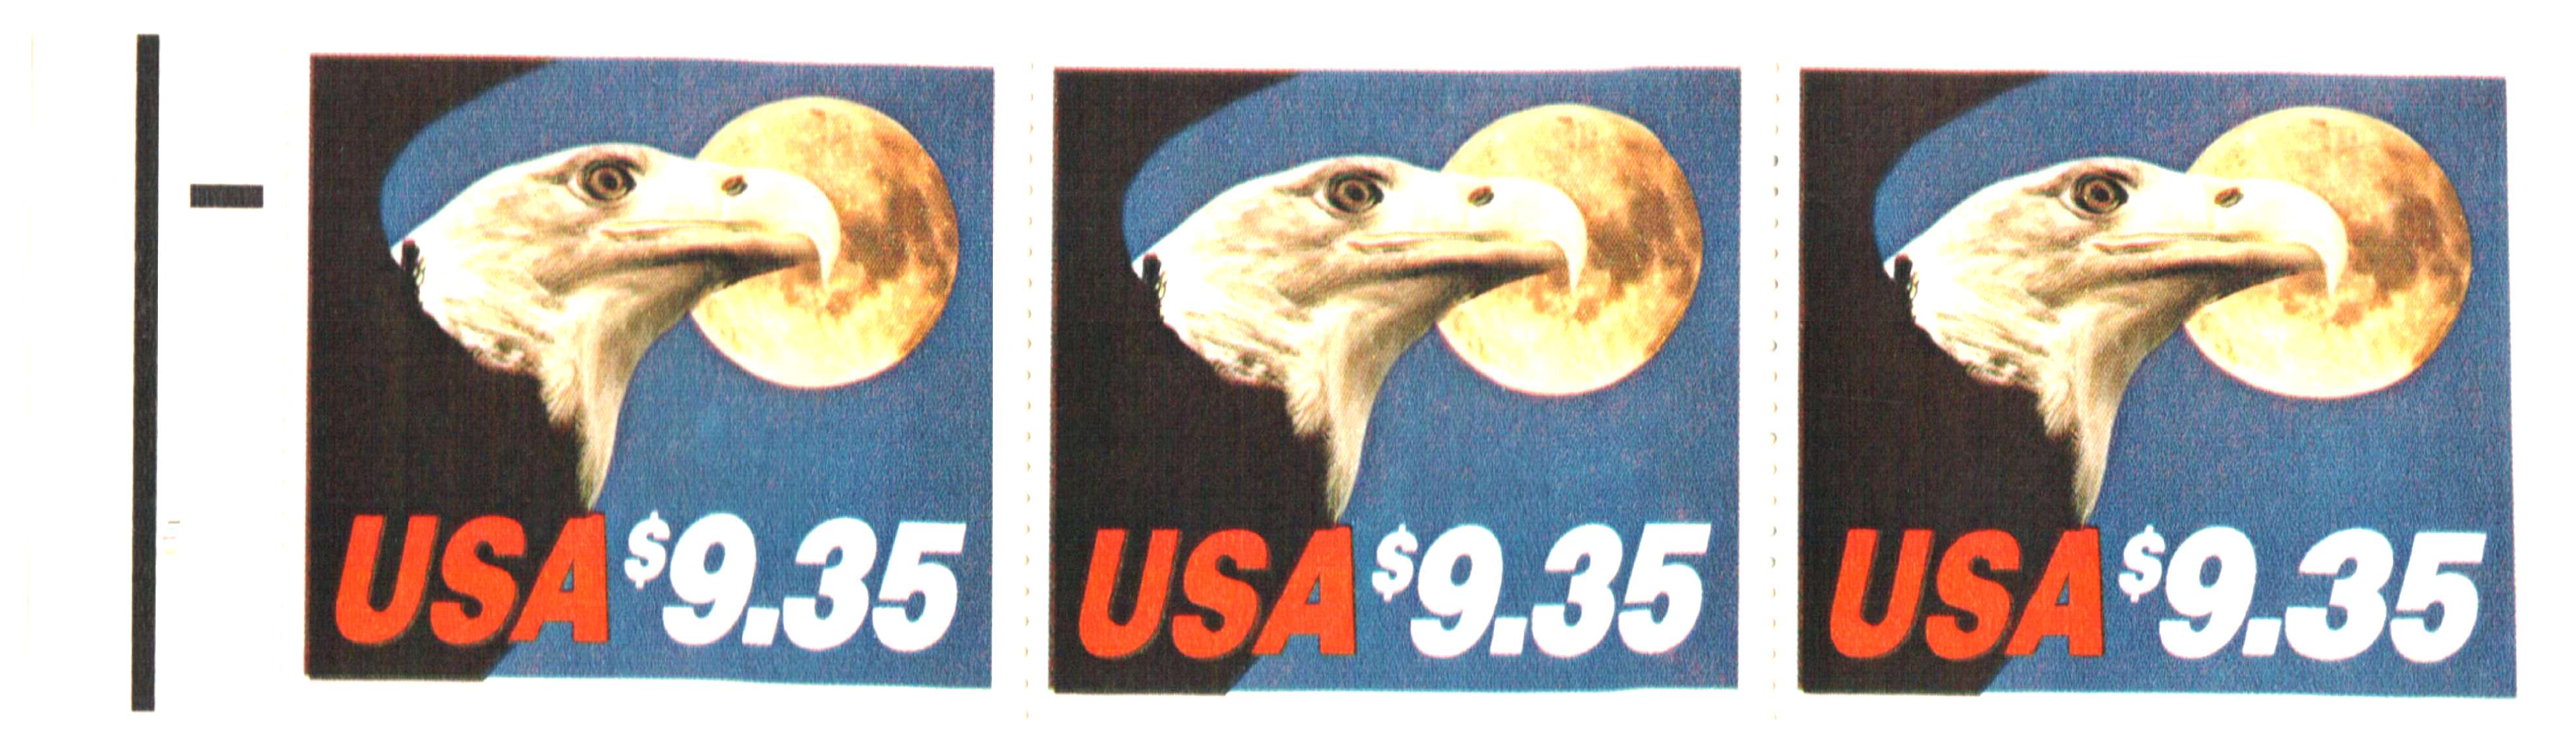 1983 $9.35 Eagle/Moon, booklet pane of 3